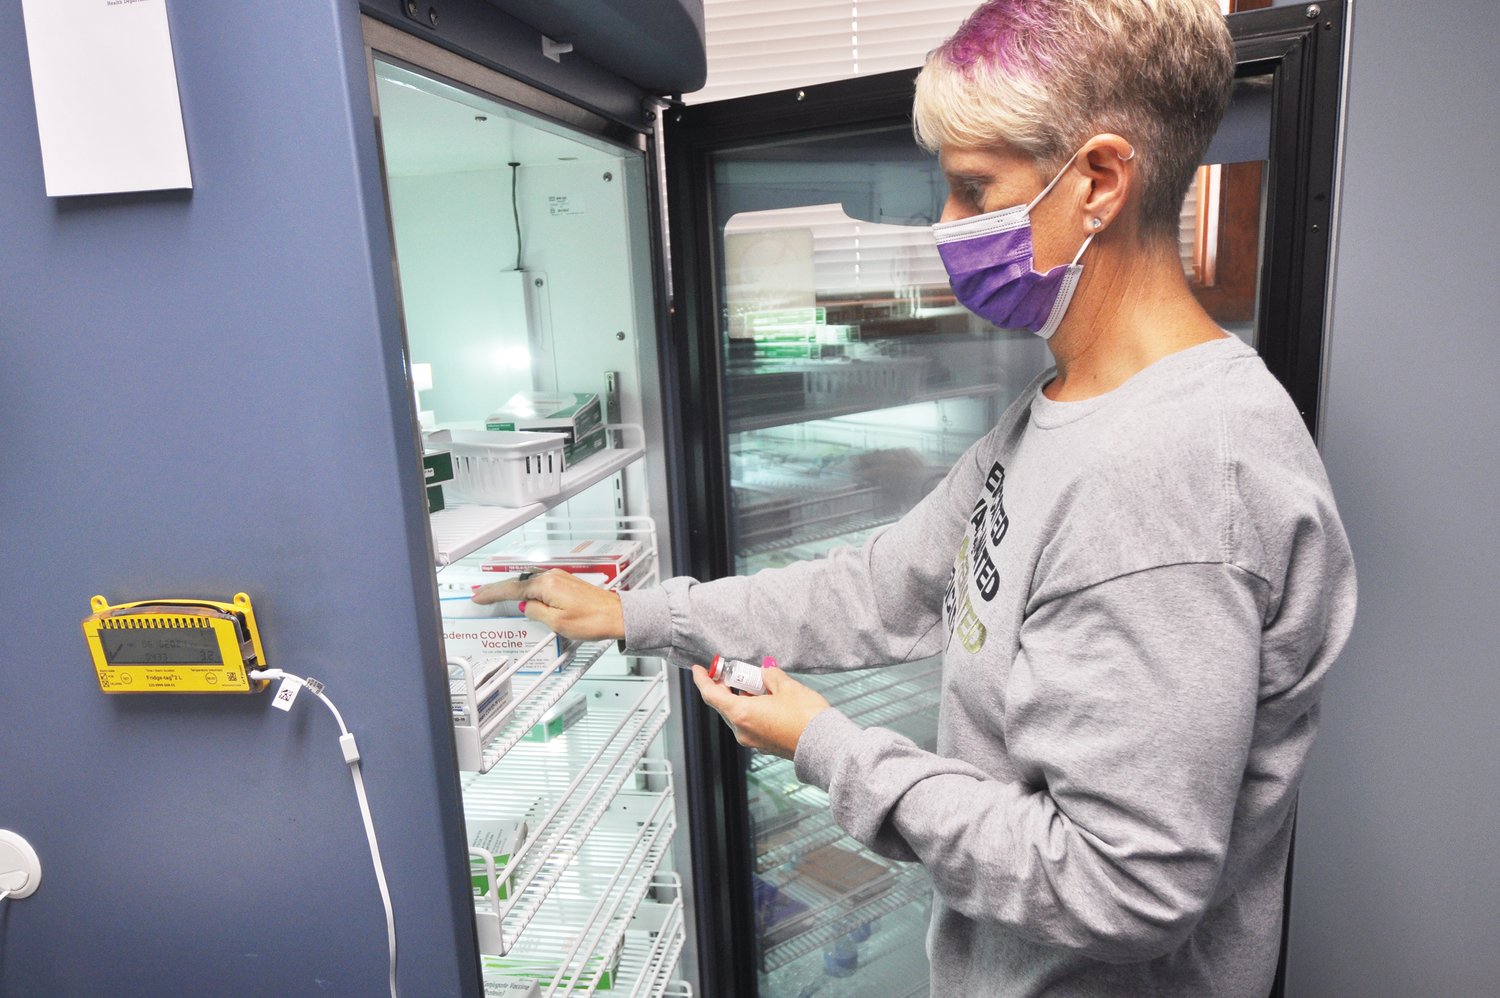 Montgomery County Health Department Preparedness Coordinator Cindy Bushong removes Moderna vaccine from a refrigerator at the health department Wednesday. MCHD offers free vaccines on Mondays, Wednesdays, Fridays and Saturdays.